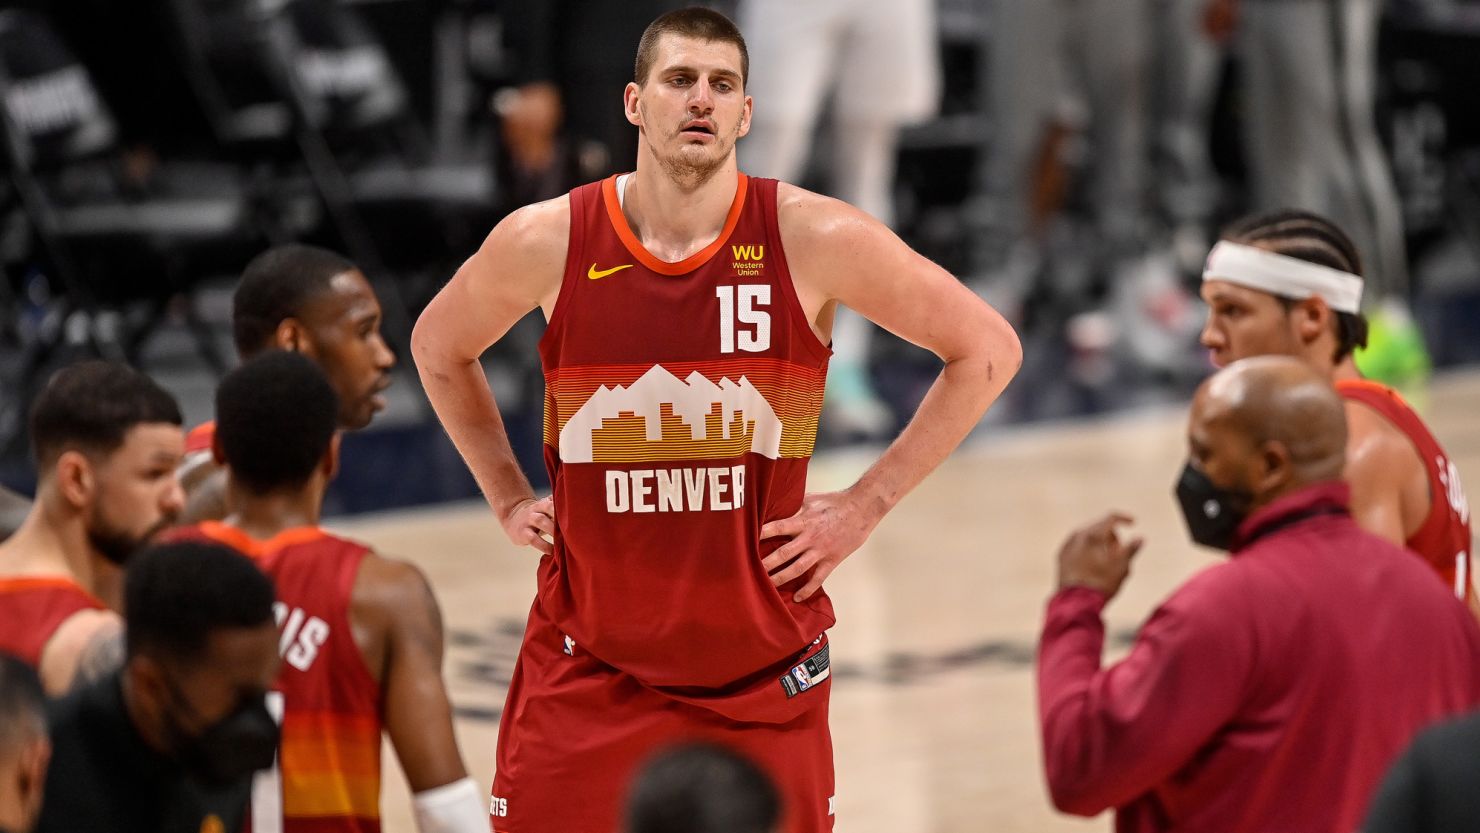 Nikola Jokic #15 led the Denver Nuggets to last season's Western Conference finals averaging 29.8 points and 11.6 rebounds in the playoffs.